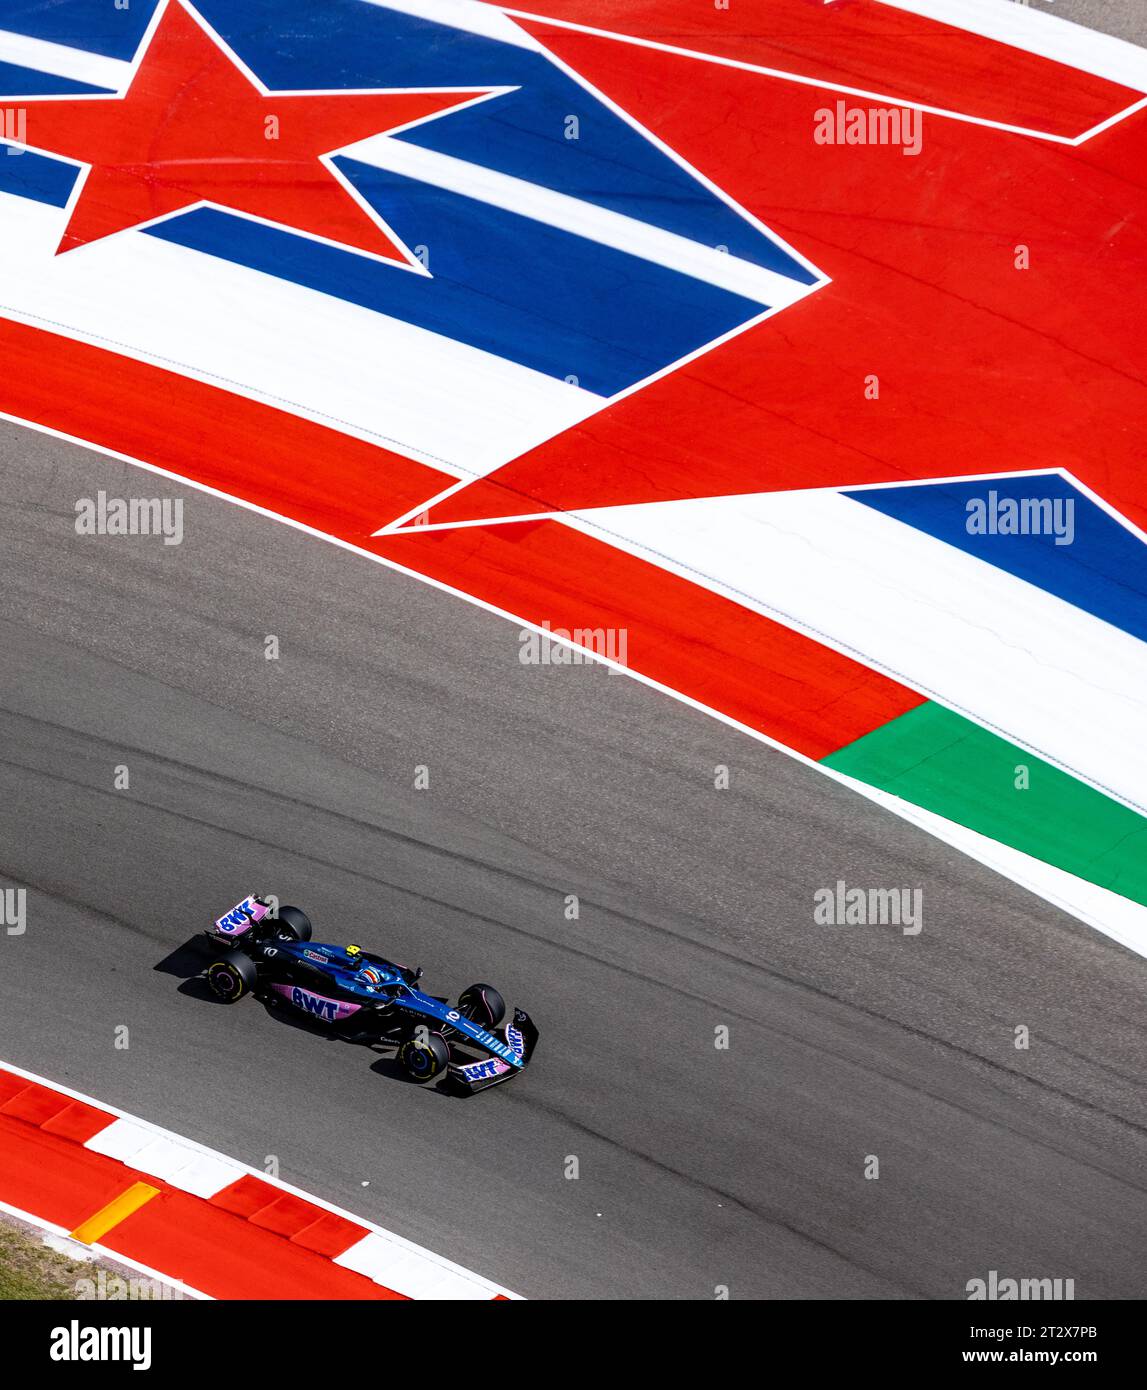 Austin, Texas - October 21th, 2023: Pierre Gasly, driver of the #10 BWT Alpine F1 car, competing in the Lenovo United States Grand Prix Sprint Race at Circuit of the Americas. Credit: Nick Paruch / Alamy Live News Stock Photo